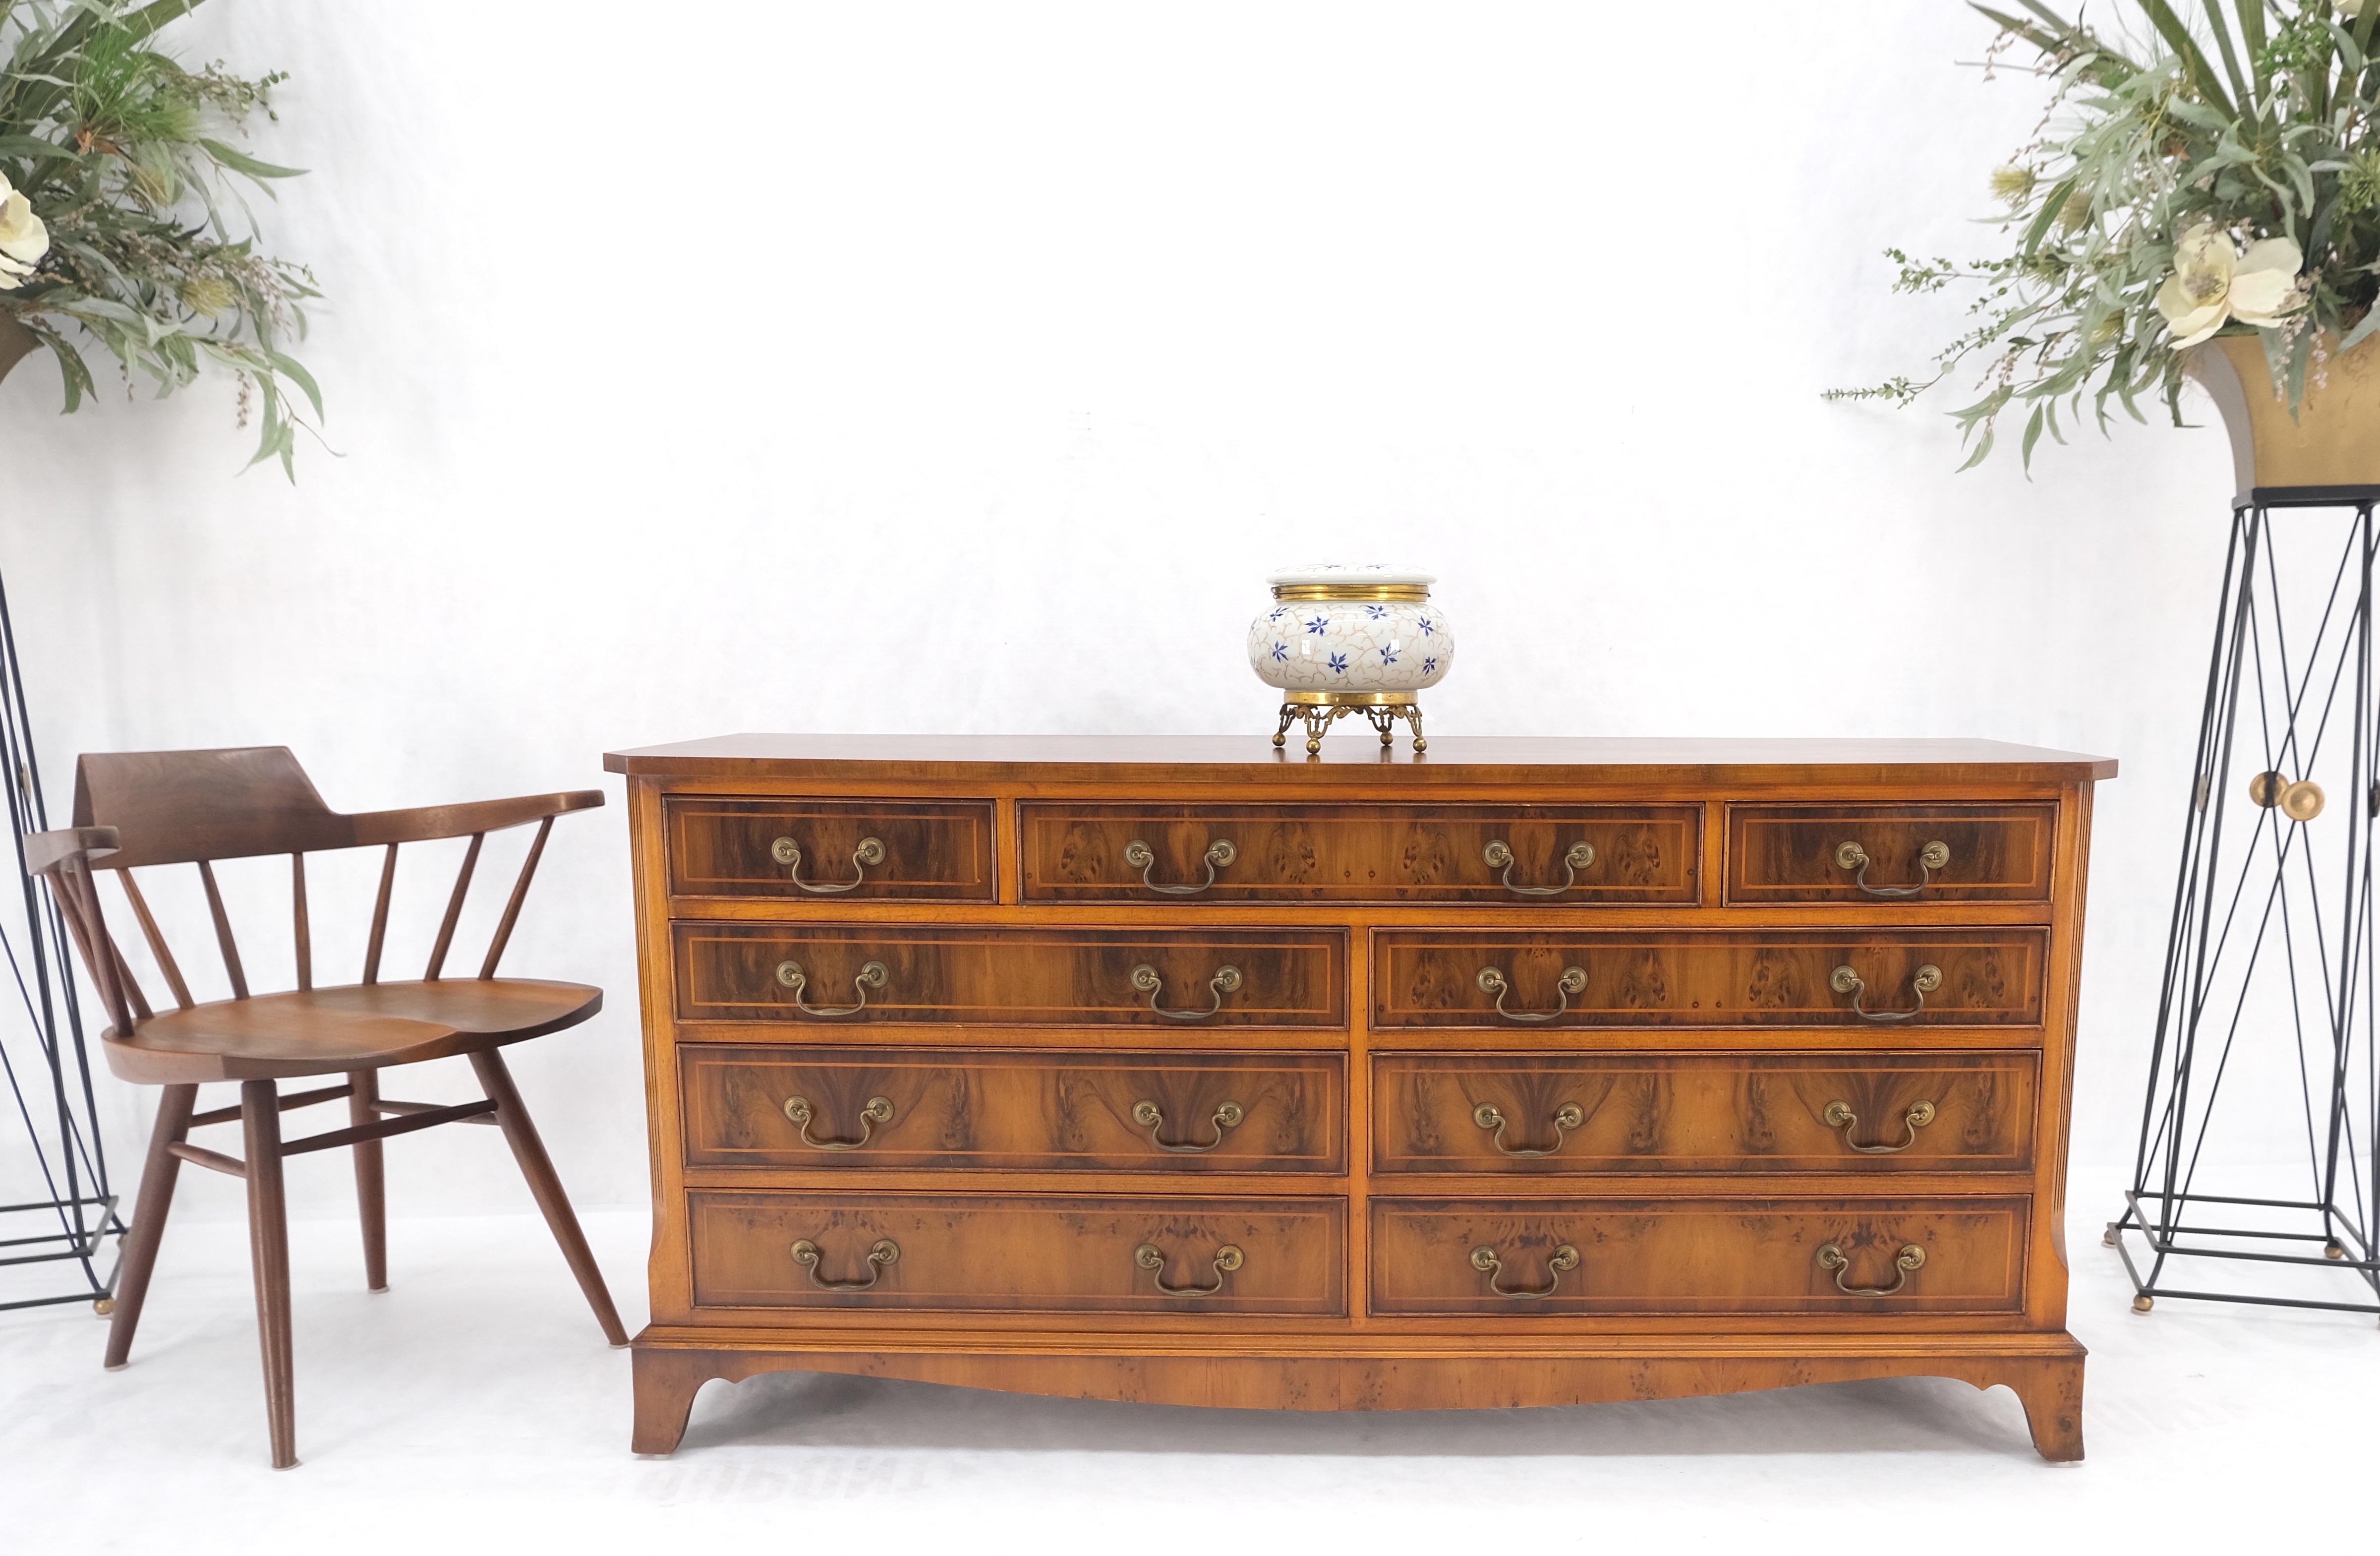 20th Century Yew Wood Long 9 Drawers Long Pencil Inlaid Dresser Credenza Brass Drops MINT! For Sale